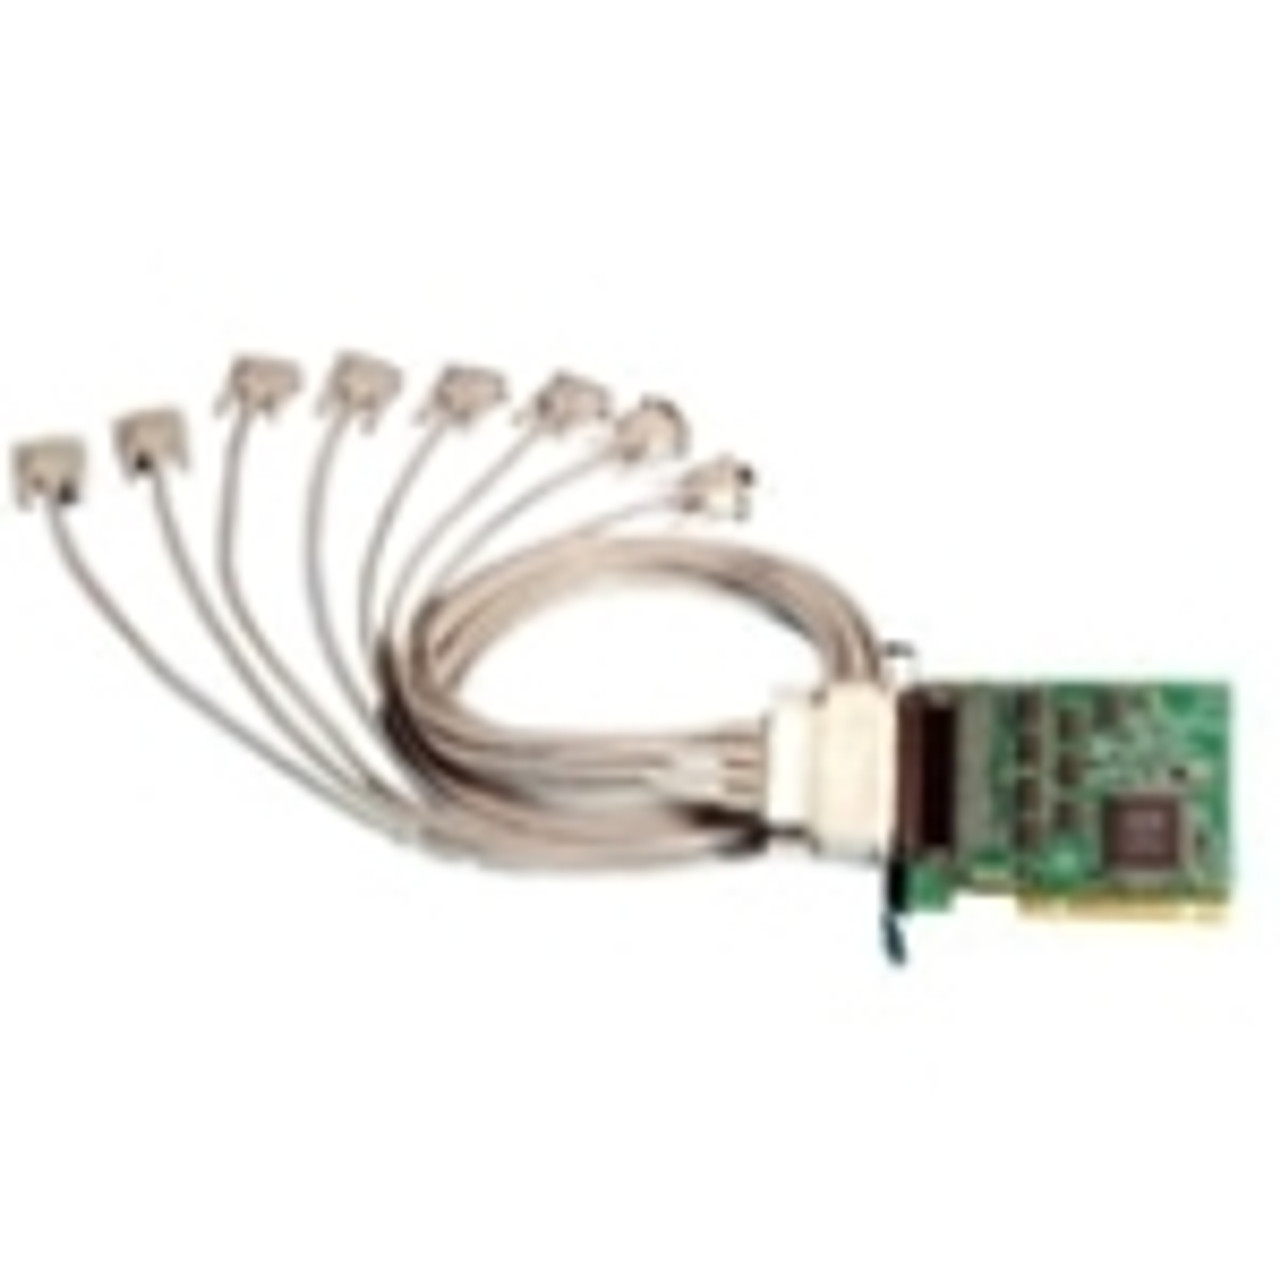 UC-275 Brainboxes UC-275 8-port Multiport Serial Adapter Universal PCI 8 x DB-25 RS-232 Serial Via Cable Plug-in Card